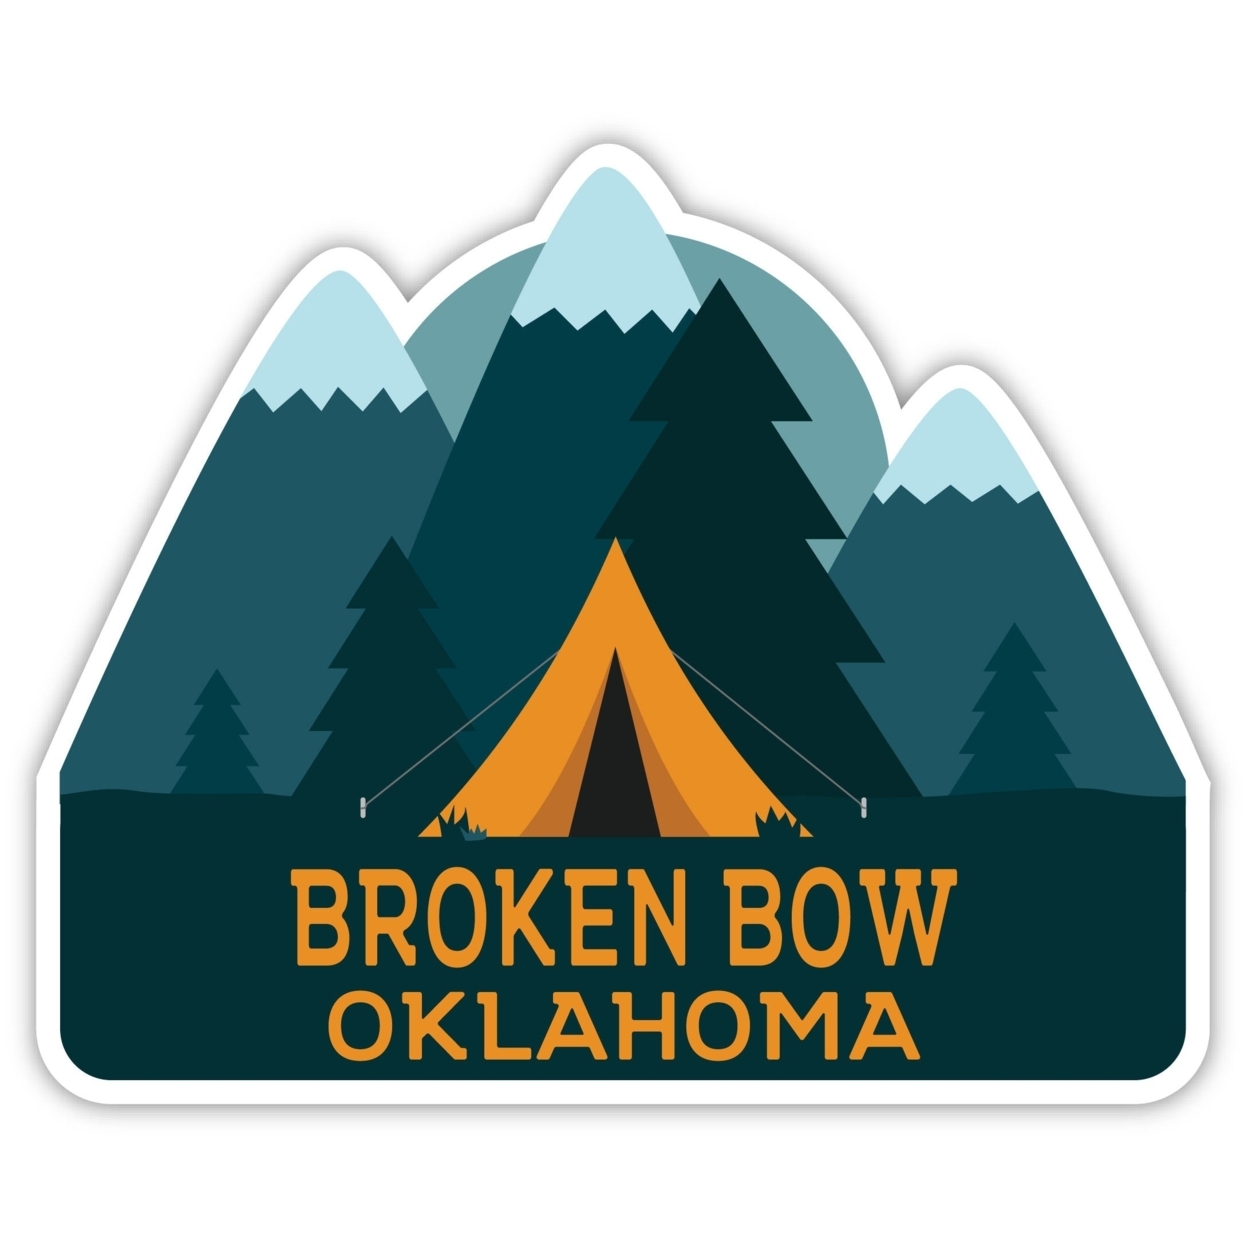 Broken Bow Oklahoma Souvenir Decorative Stickers (Choose Theme And Size) - 4-Pack, 6-Inch, Adventures Awaits